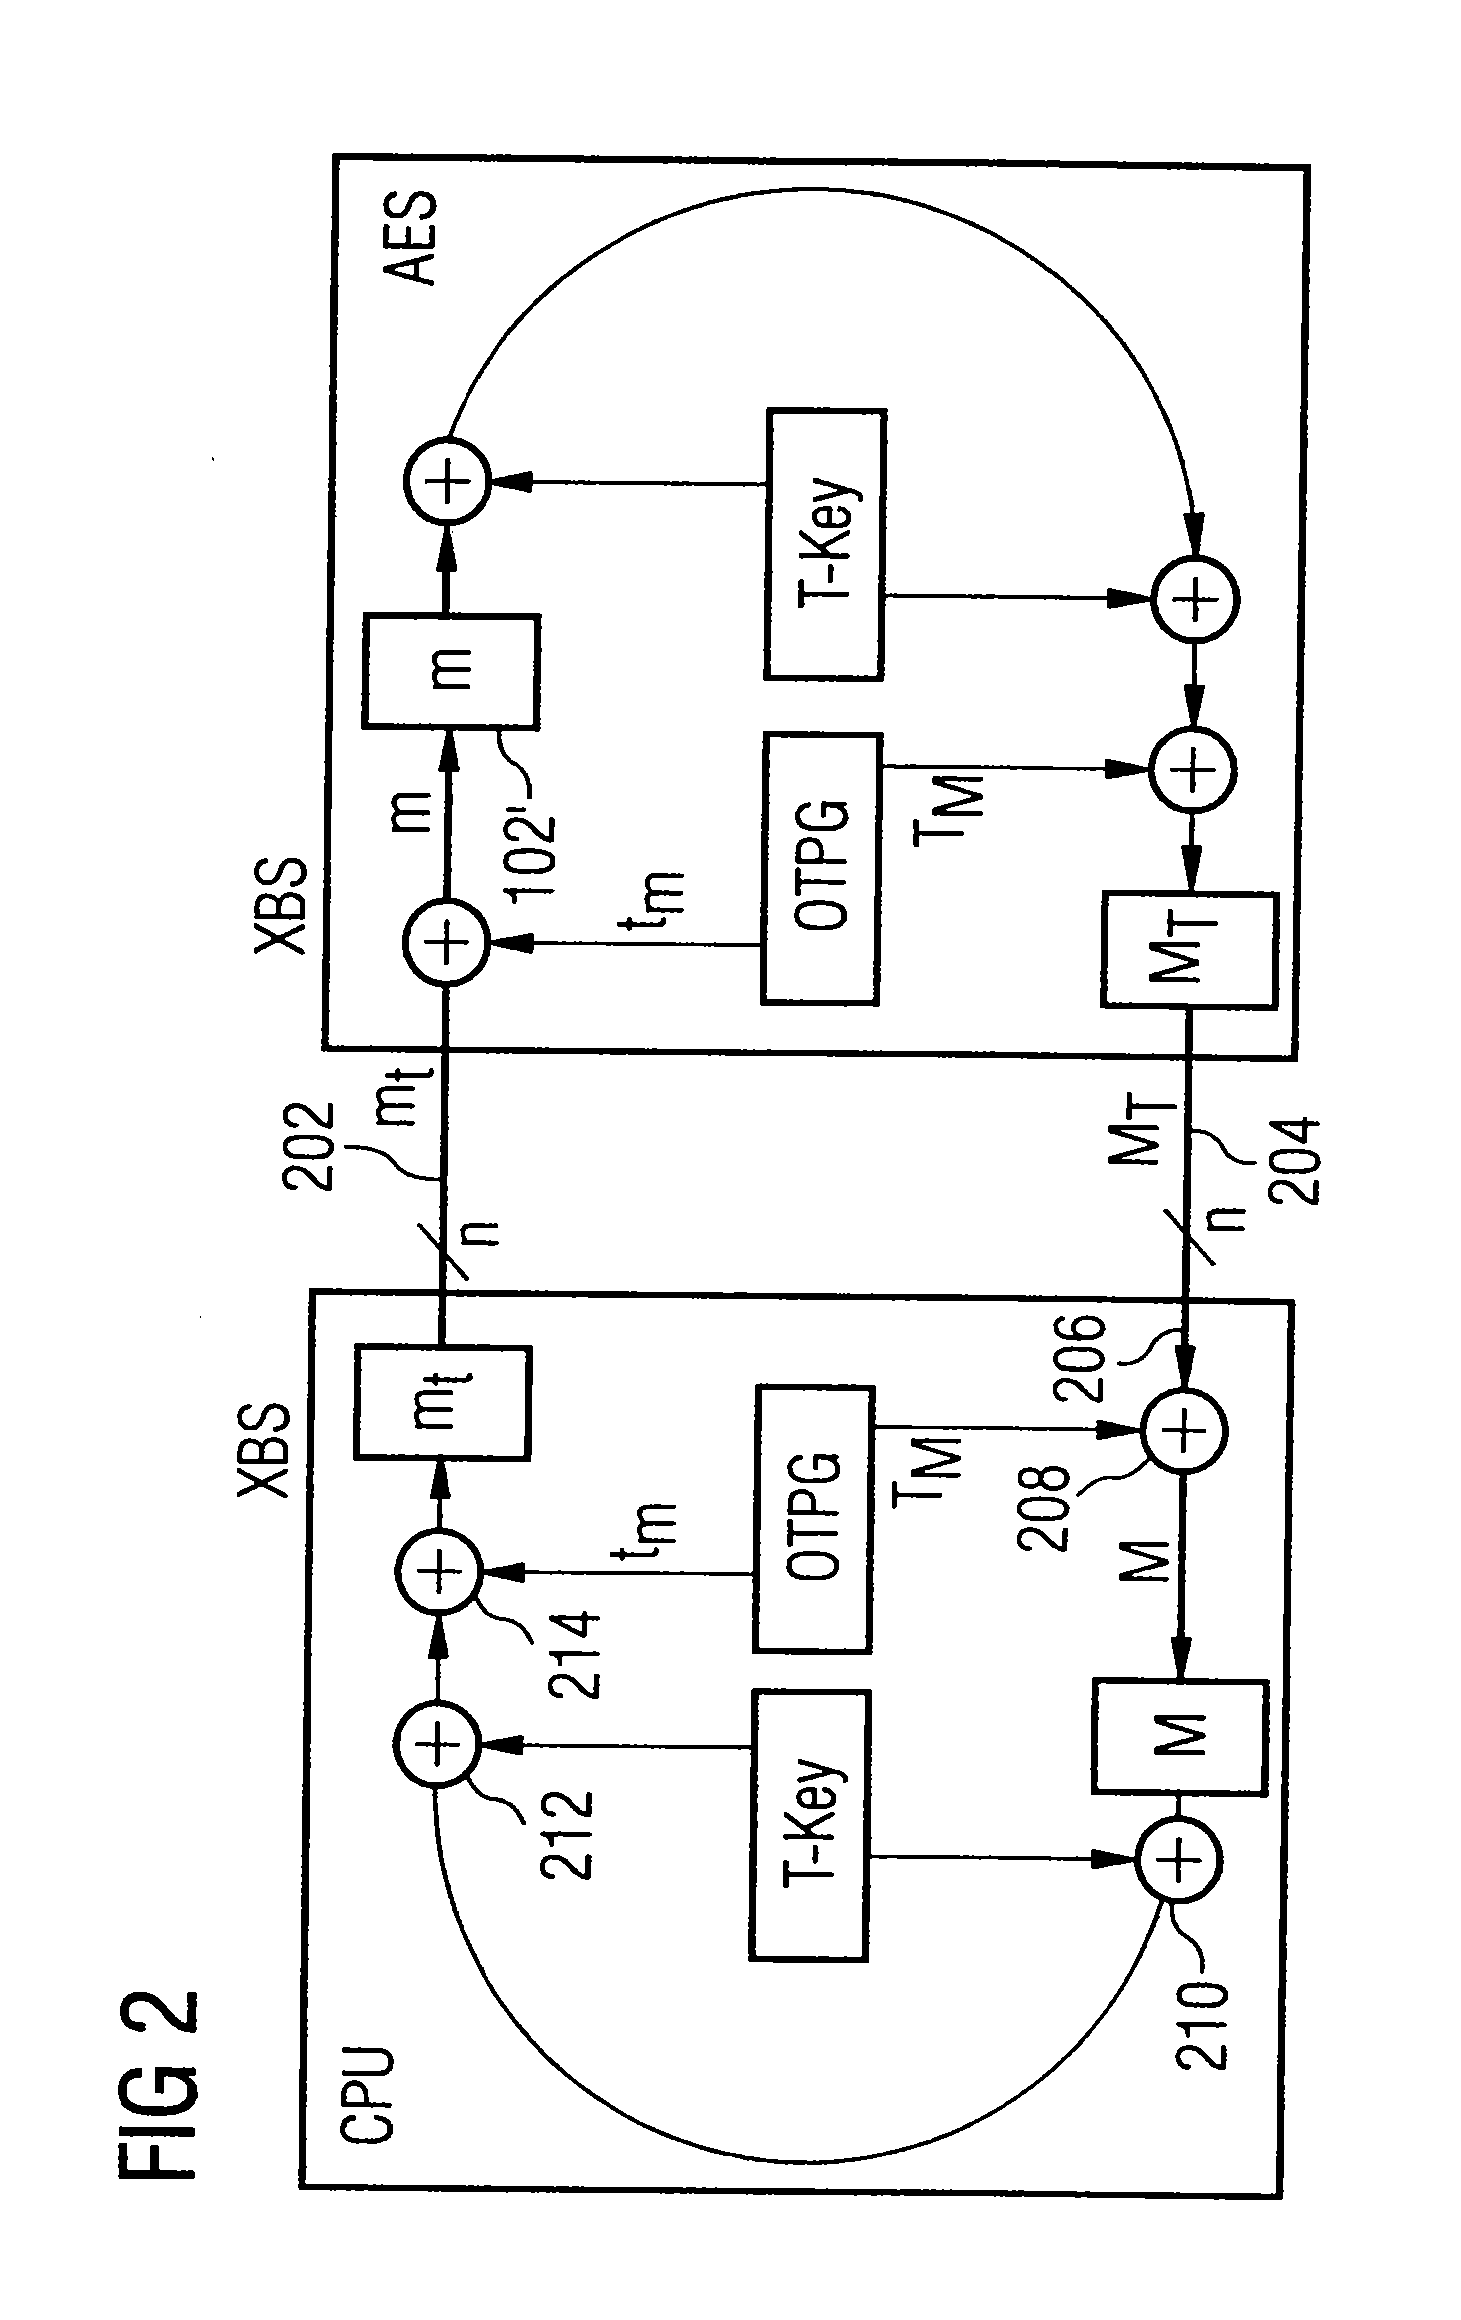 Data-processing apparatus and method for processing data